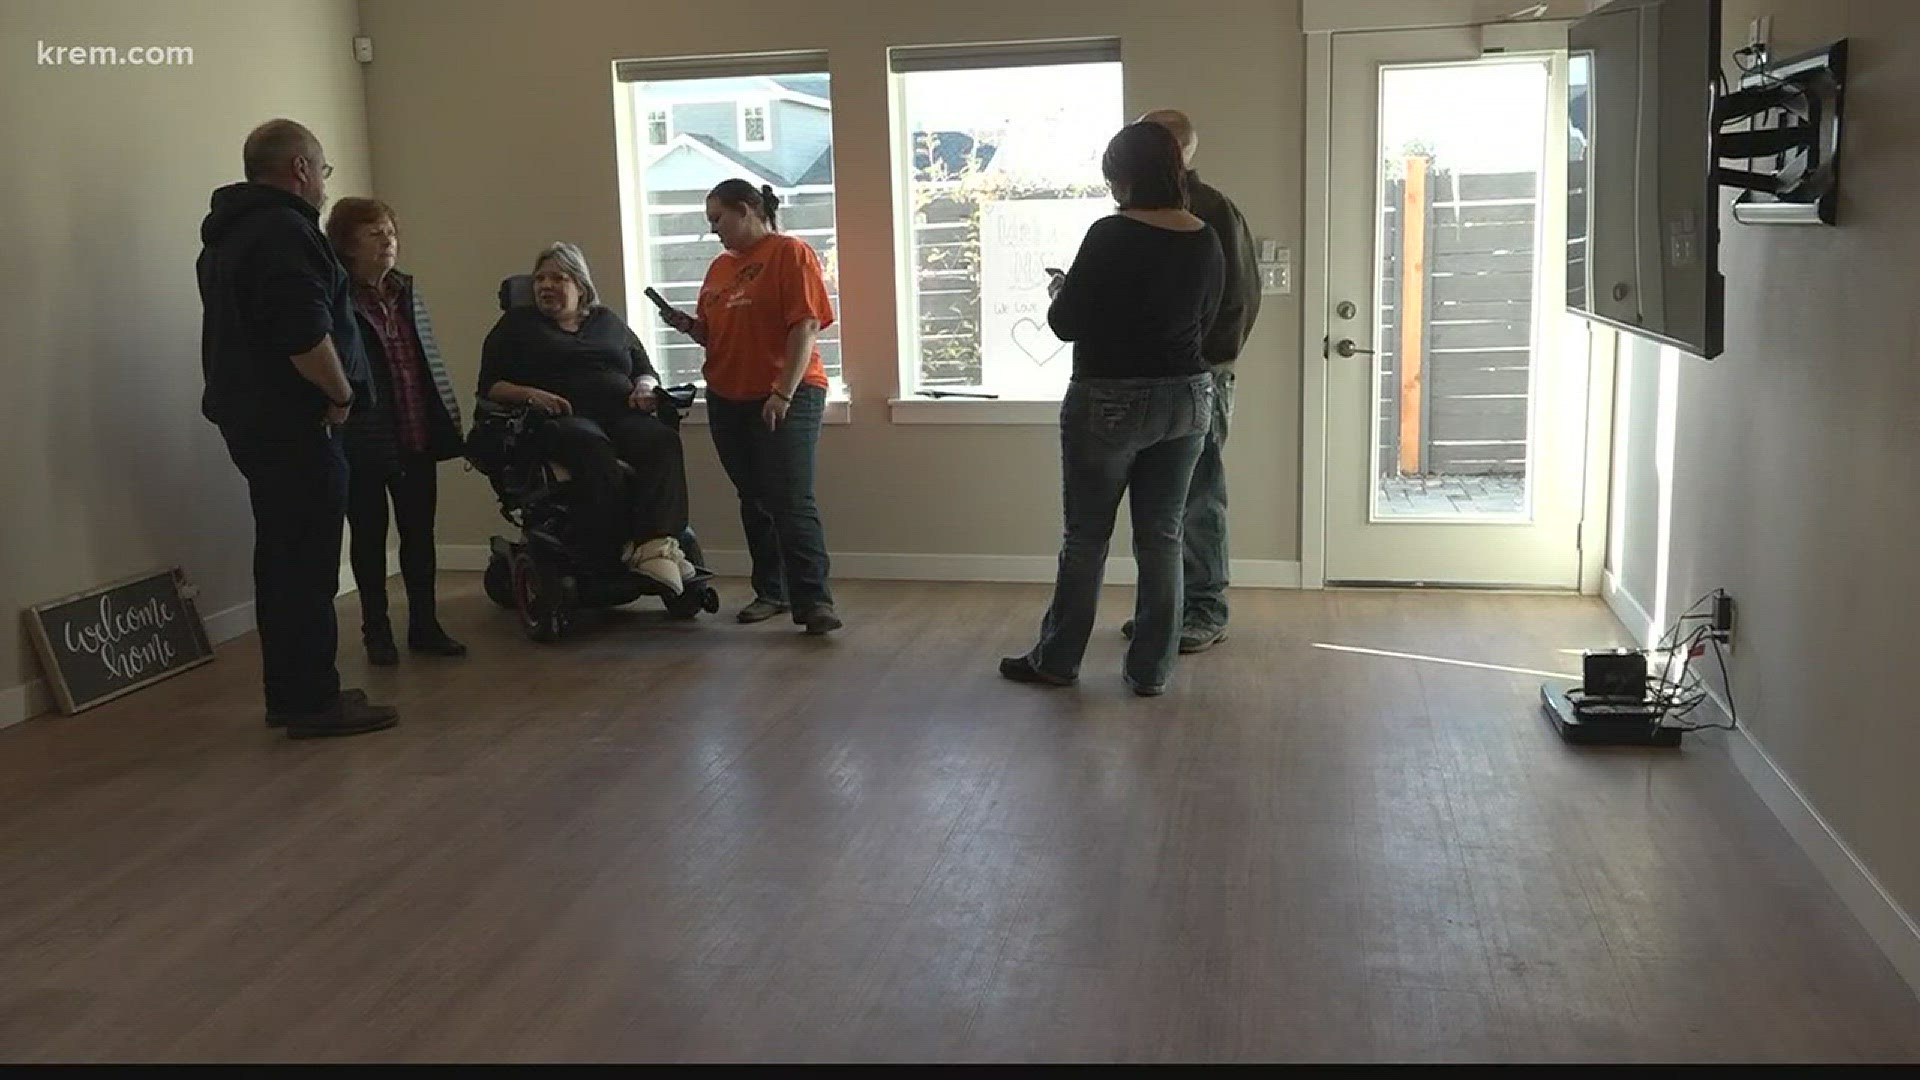 Matt's Place provides home equipped for ALS patient